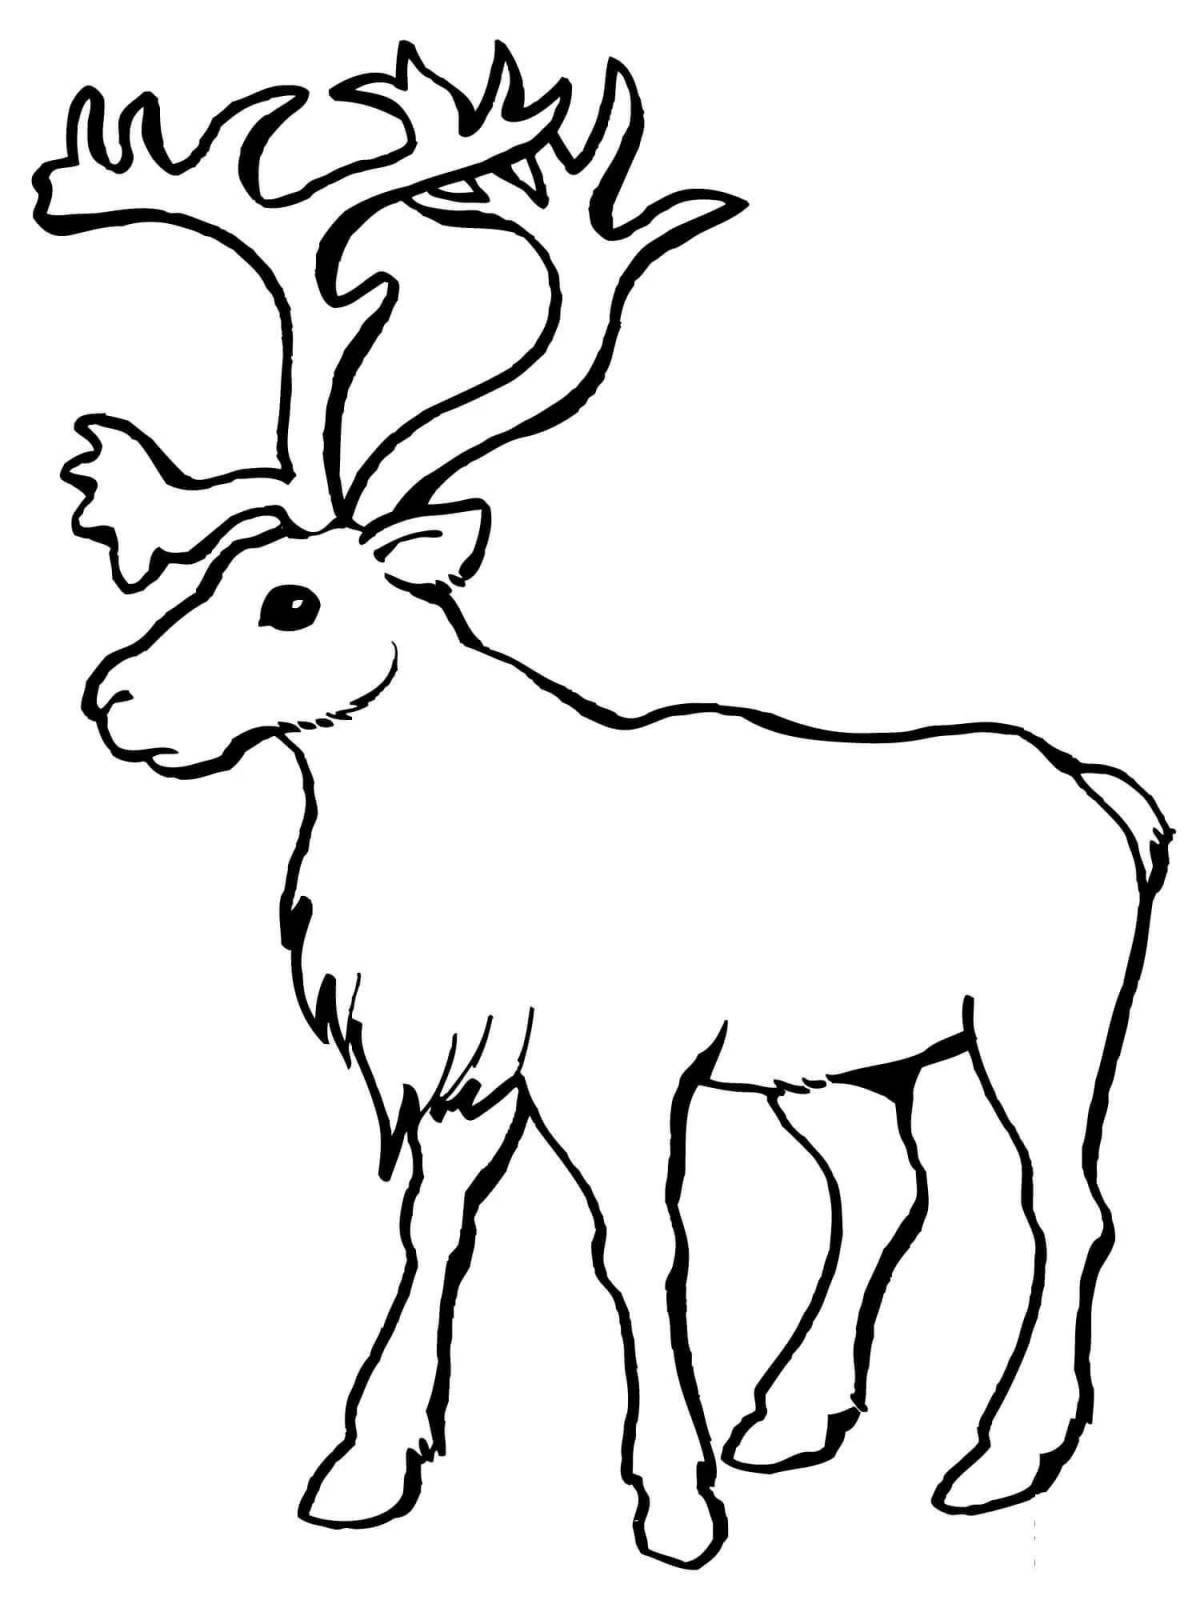 Coloring page affectionate reindeer